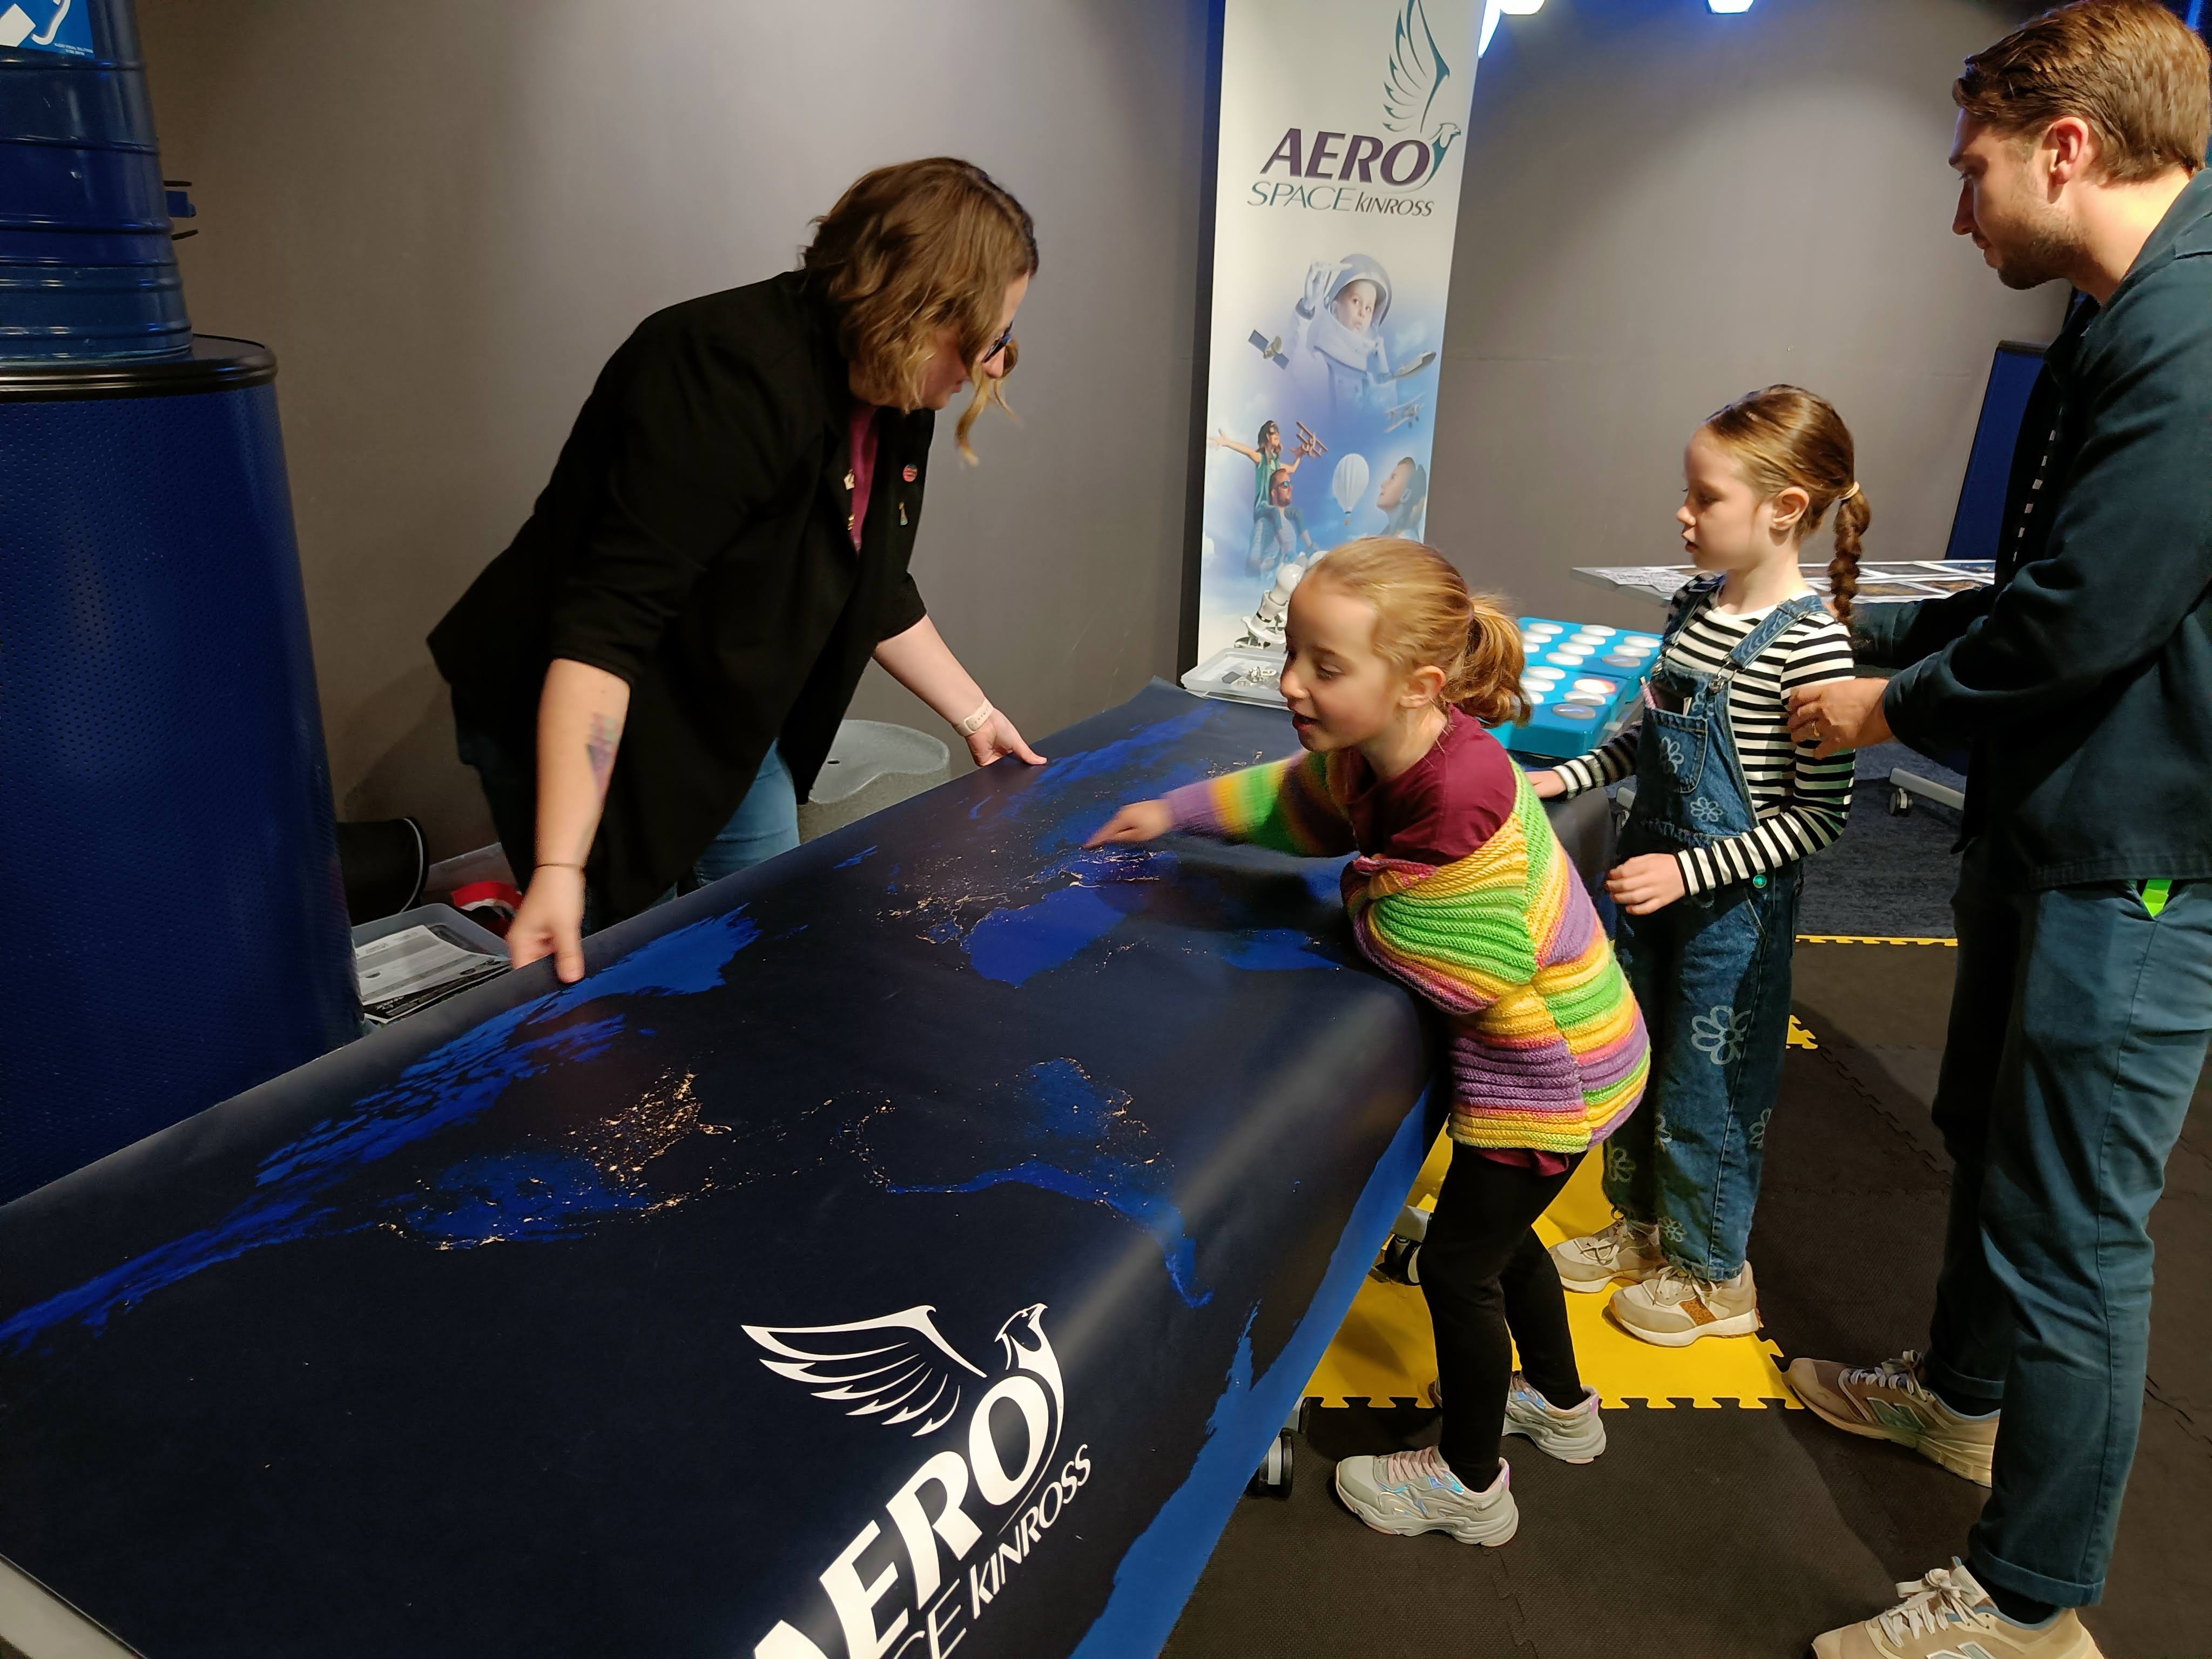 Aerospace Kinross carrying out community engagement